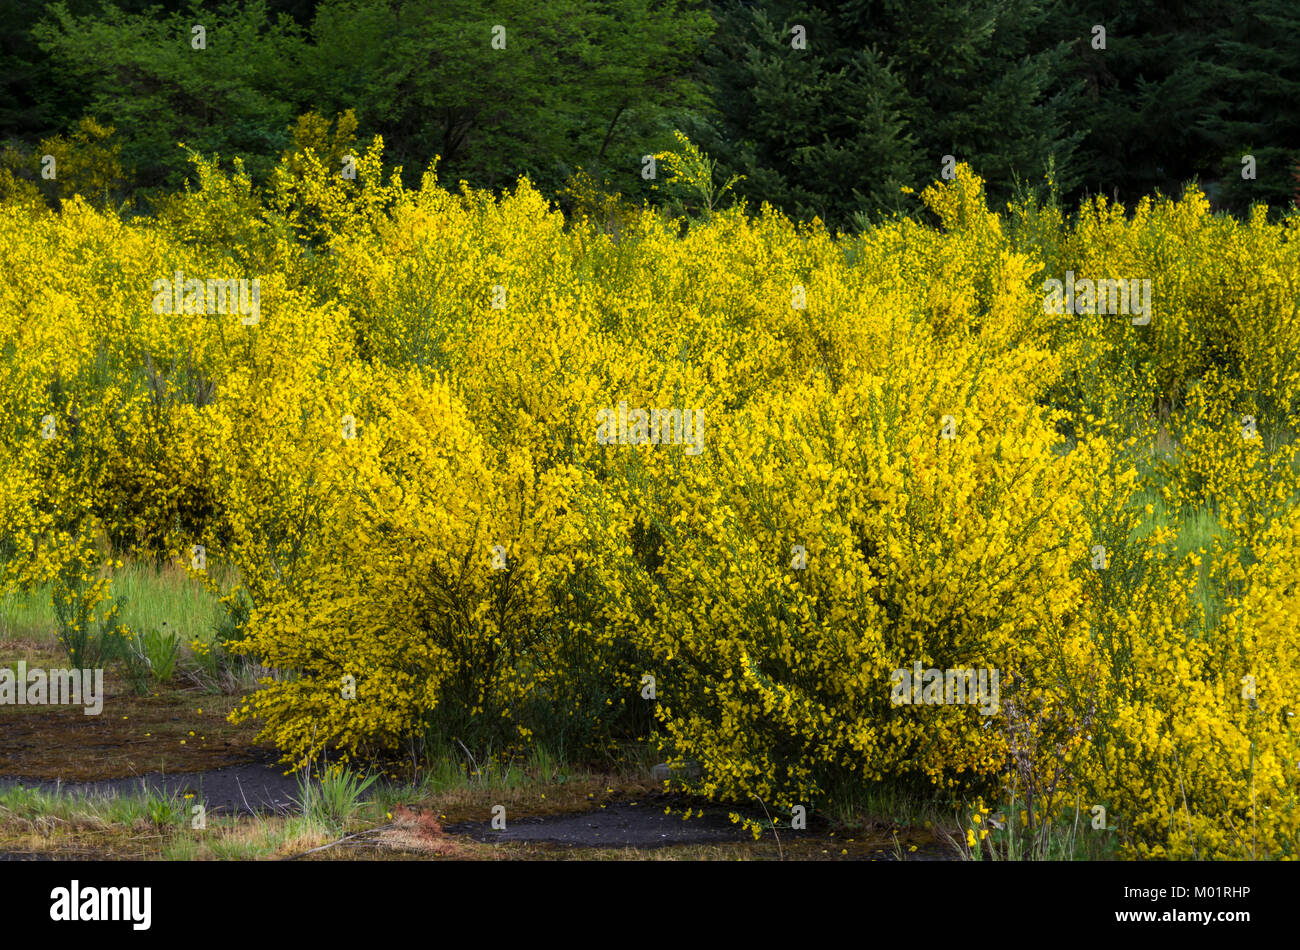 Cytisus scoparius or Scotch Broom an invasive species that blooms yellow in spring Stock Photo